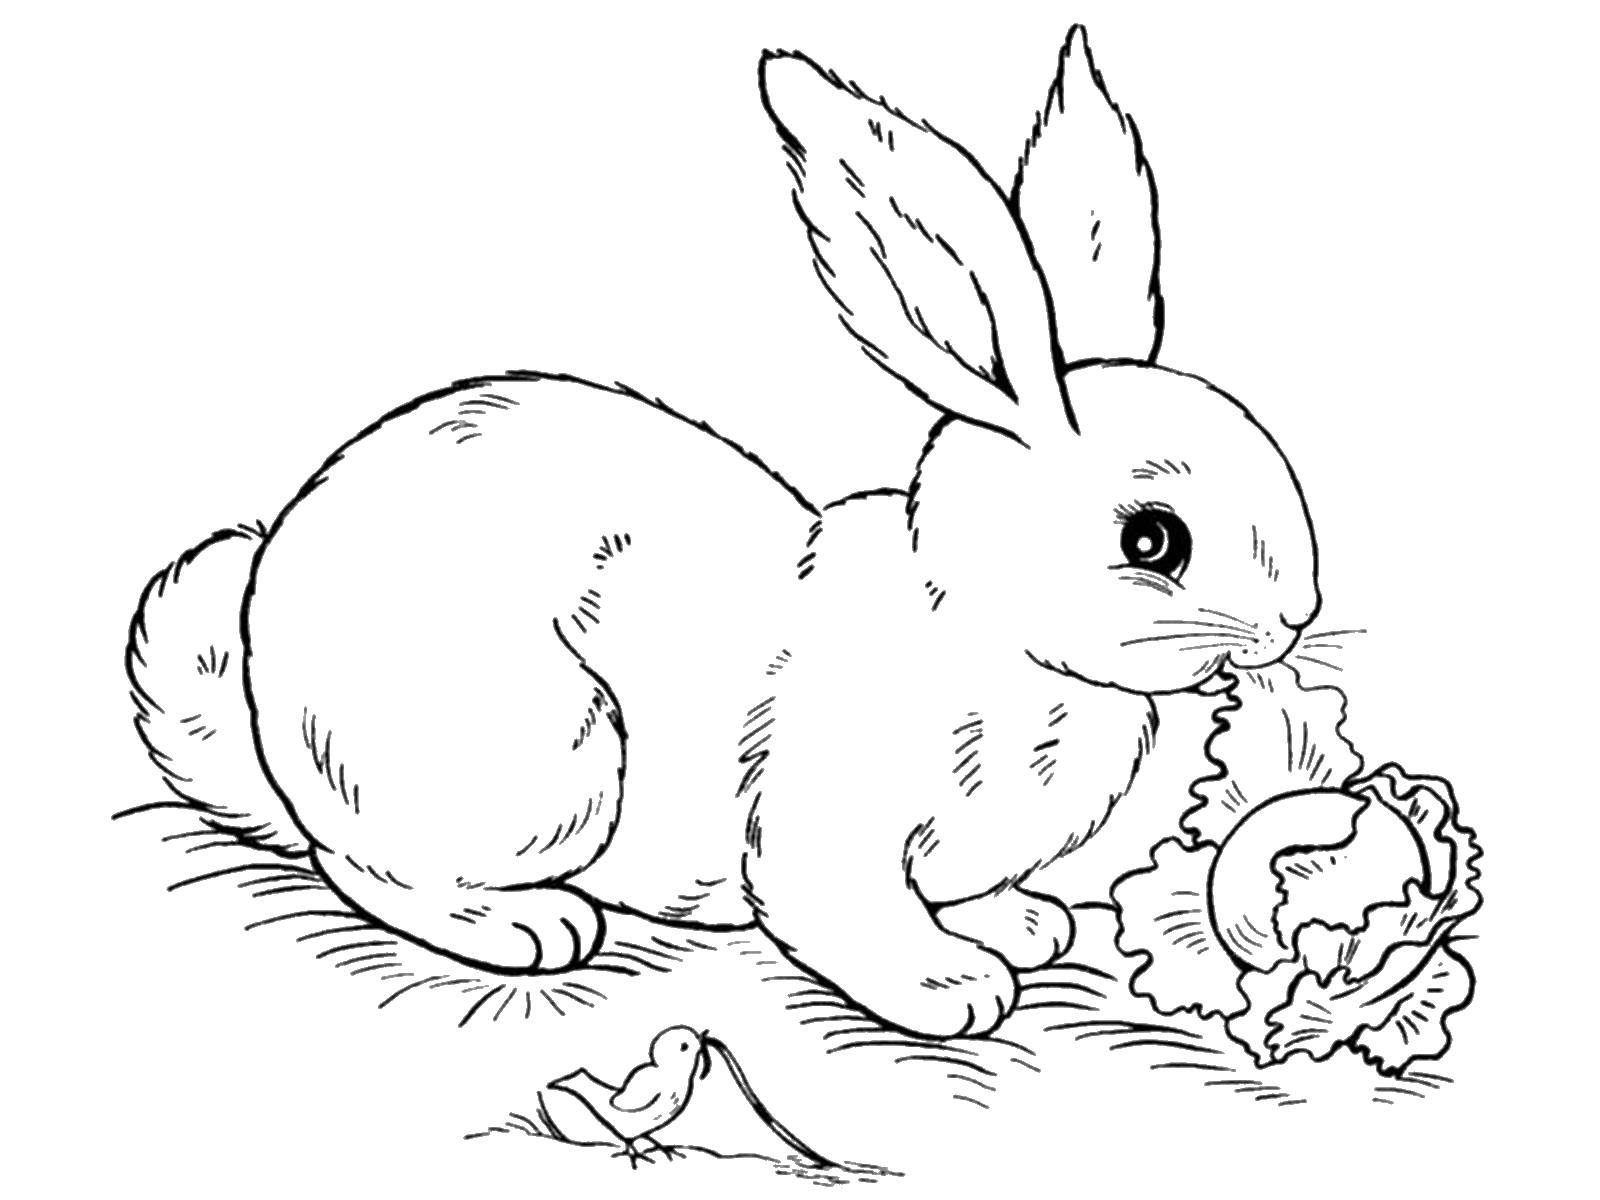 Coloring The rabbit eats the cabbage. Category animals. Tags:  hare.